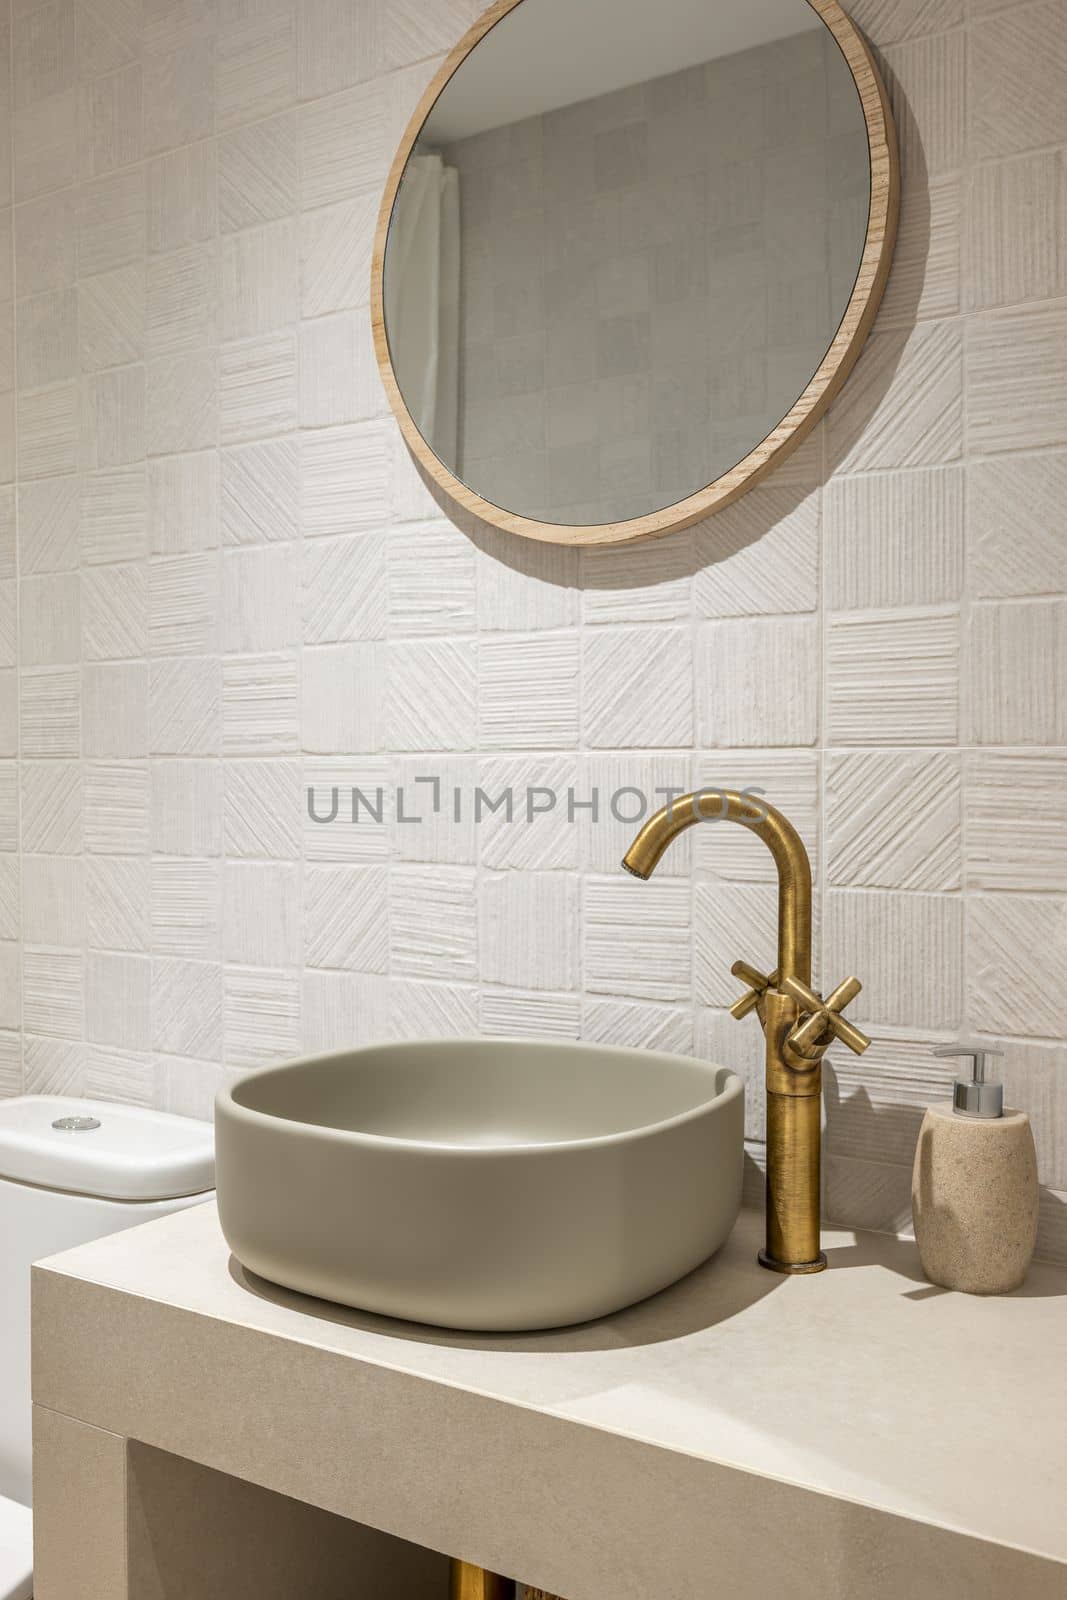 Neat stylish oval-shaped sink on white marble countertop with an elegant copper-coloured faucet. Above sink hangs a round modern gold-framed mirror